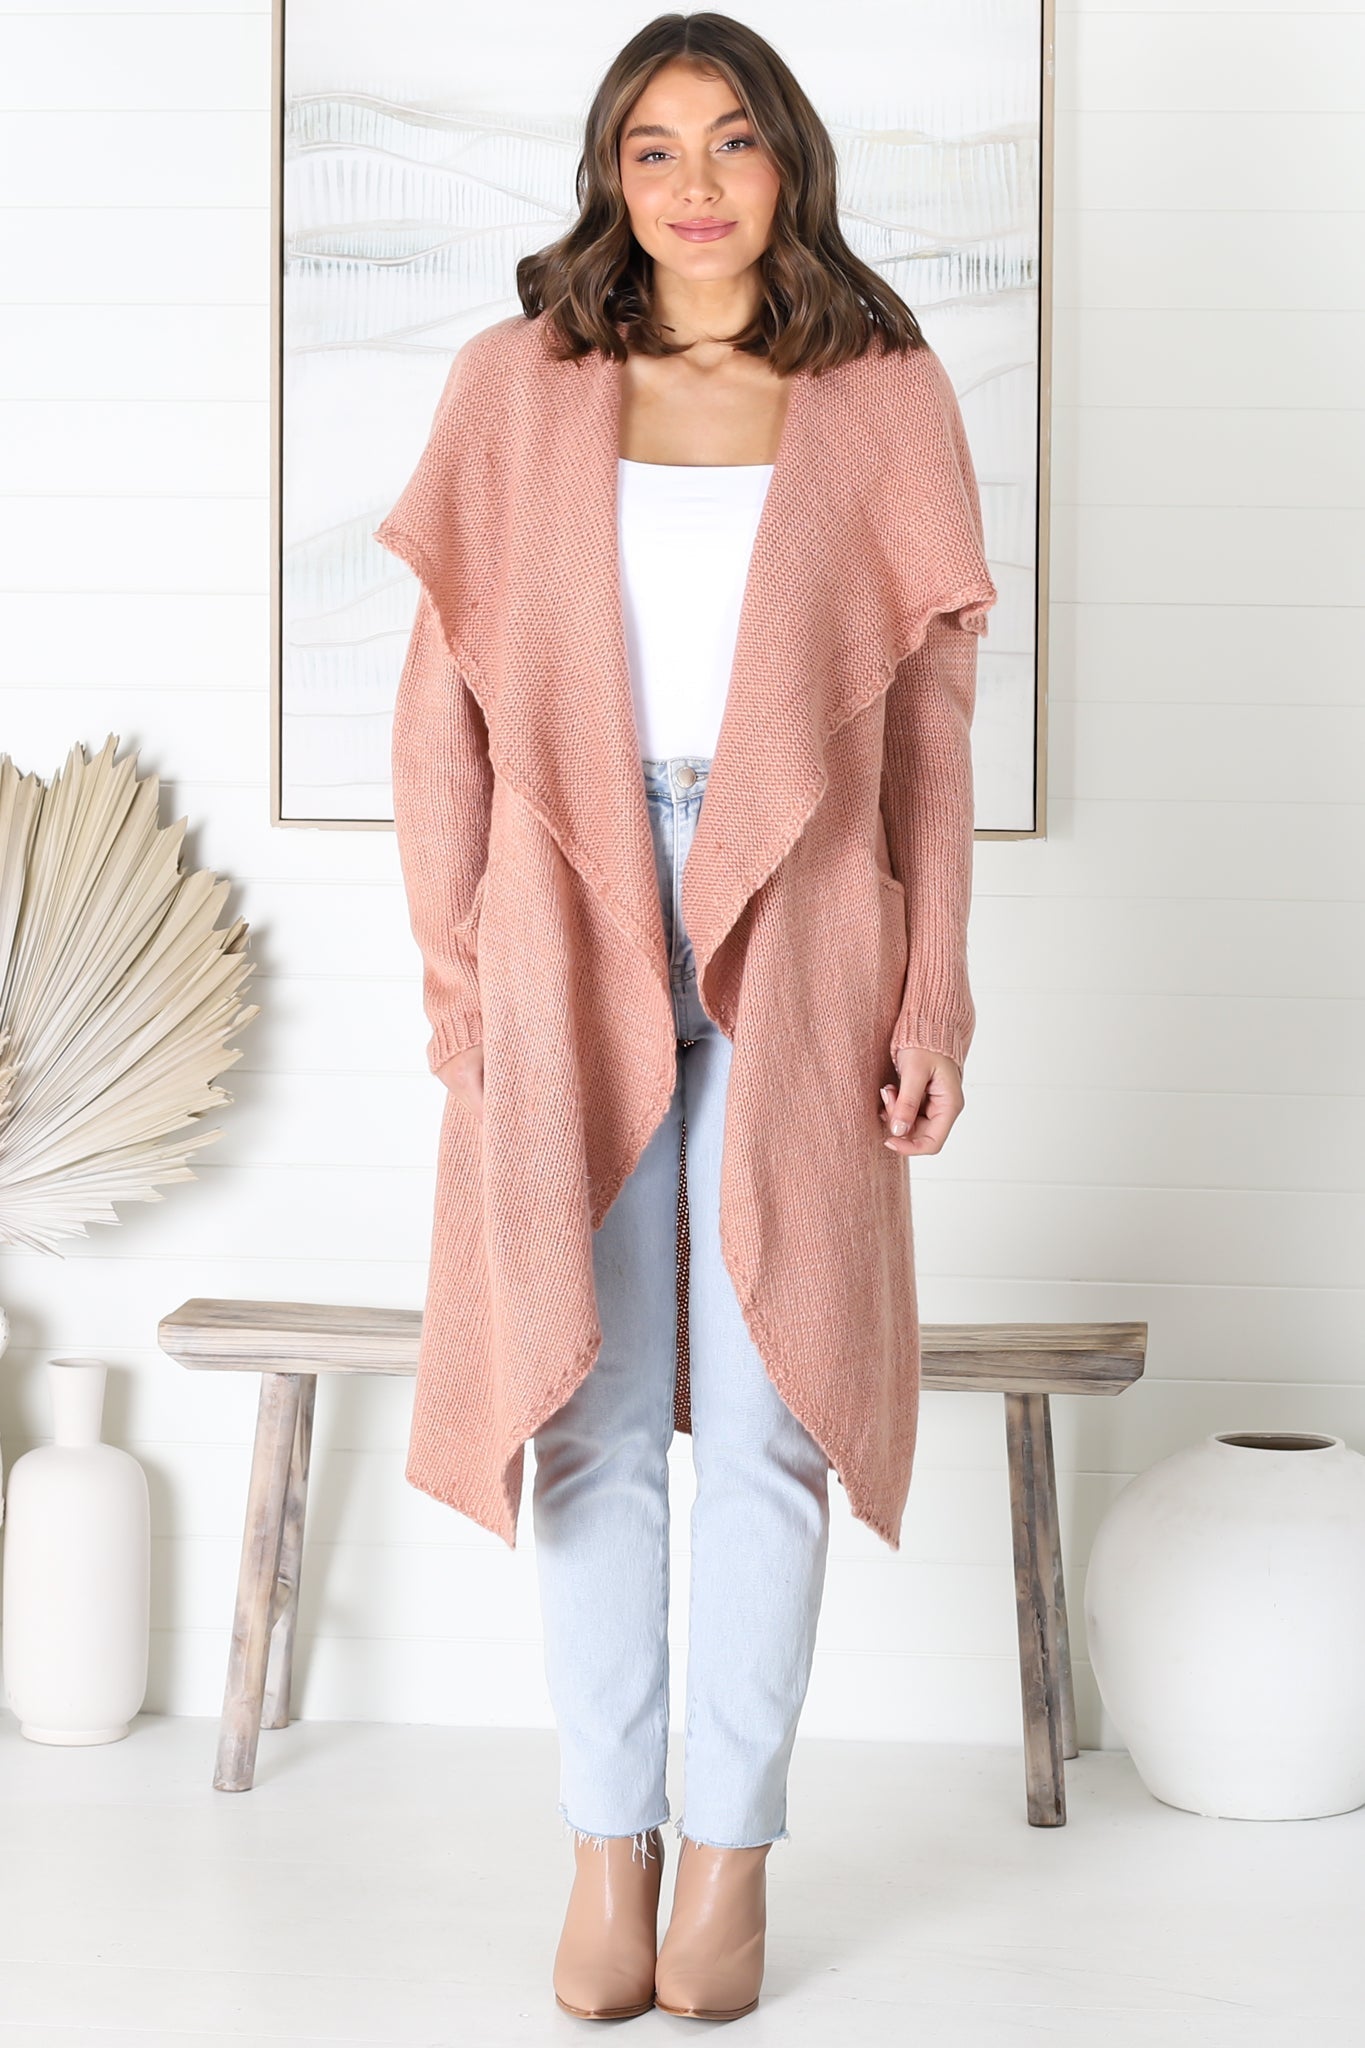 Ryden Cardigan - Thick Lapel Waterfall Collar Cardigan with Pockets in Blush